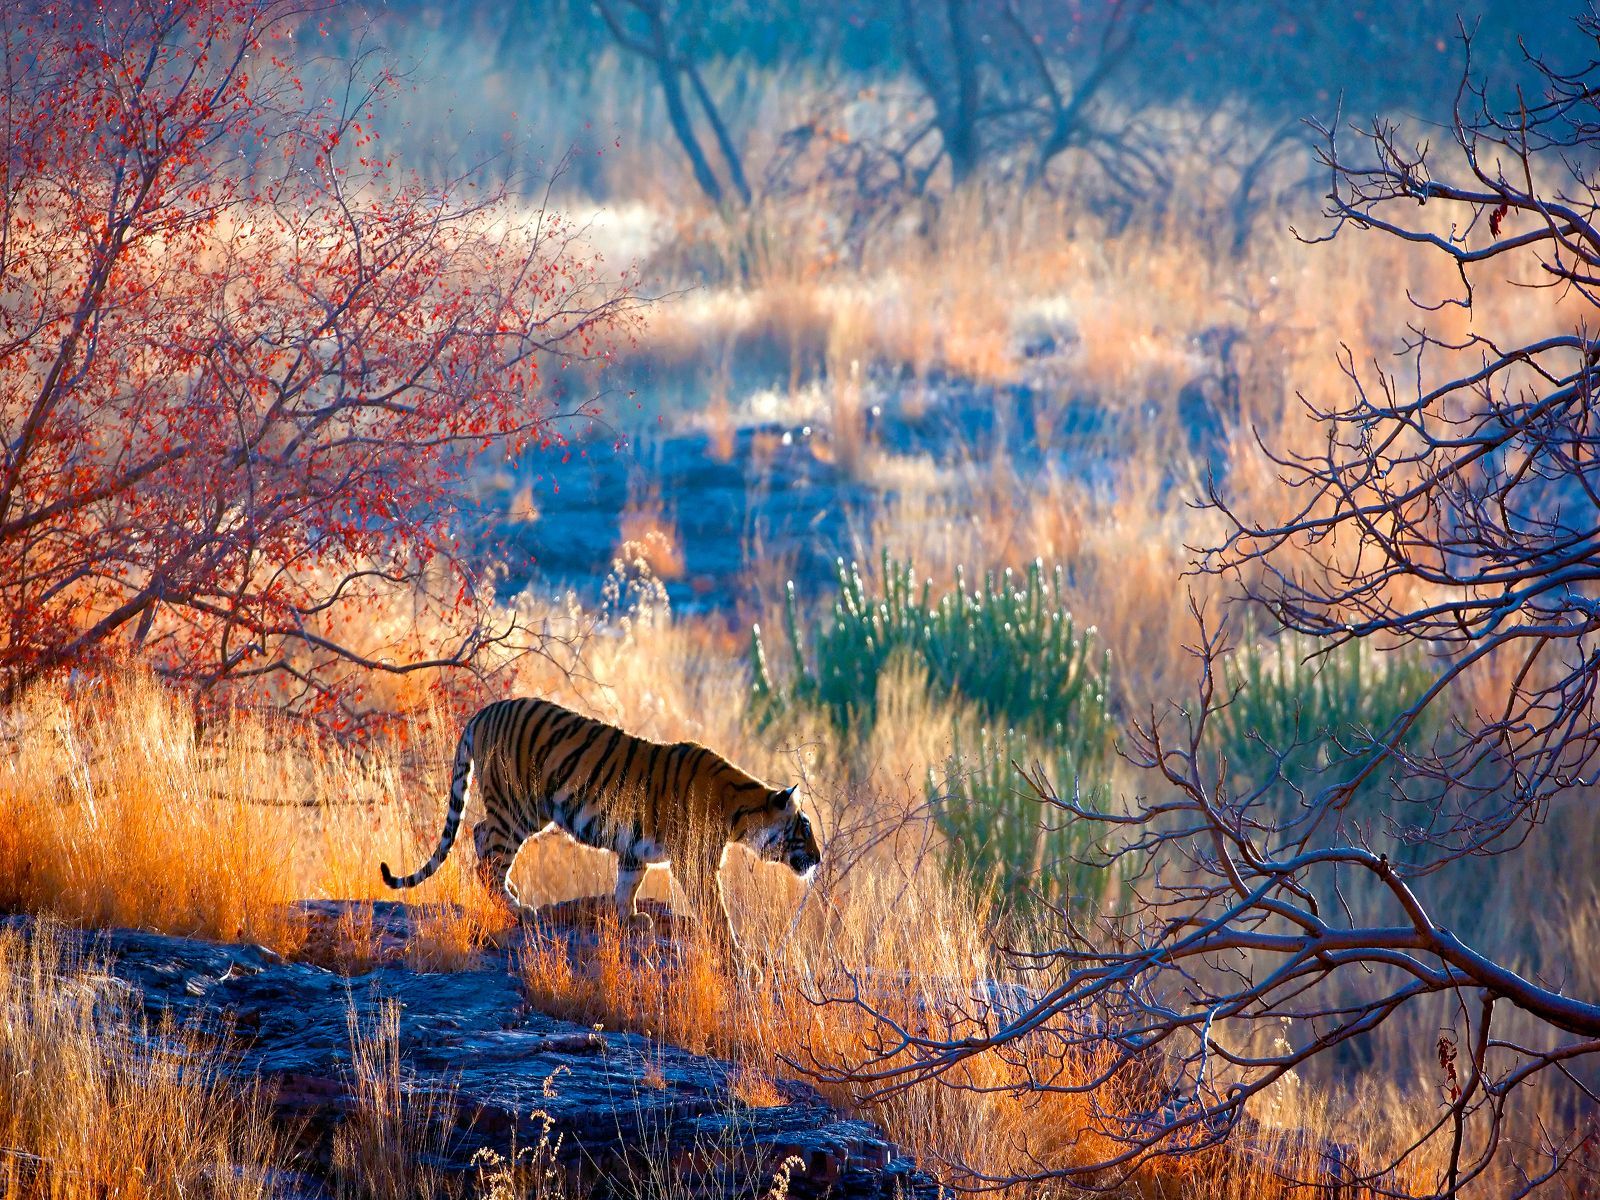 A tiger in Ranthambore National Park, India. Photo: Getty.